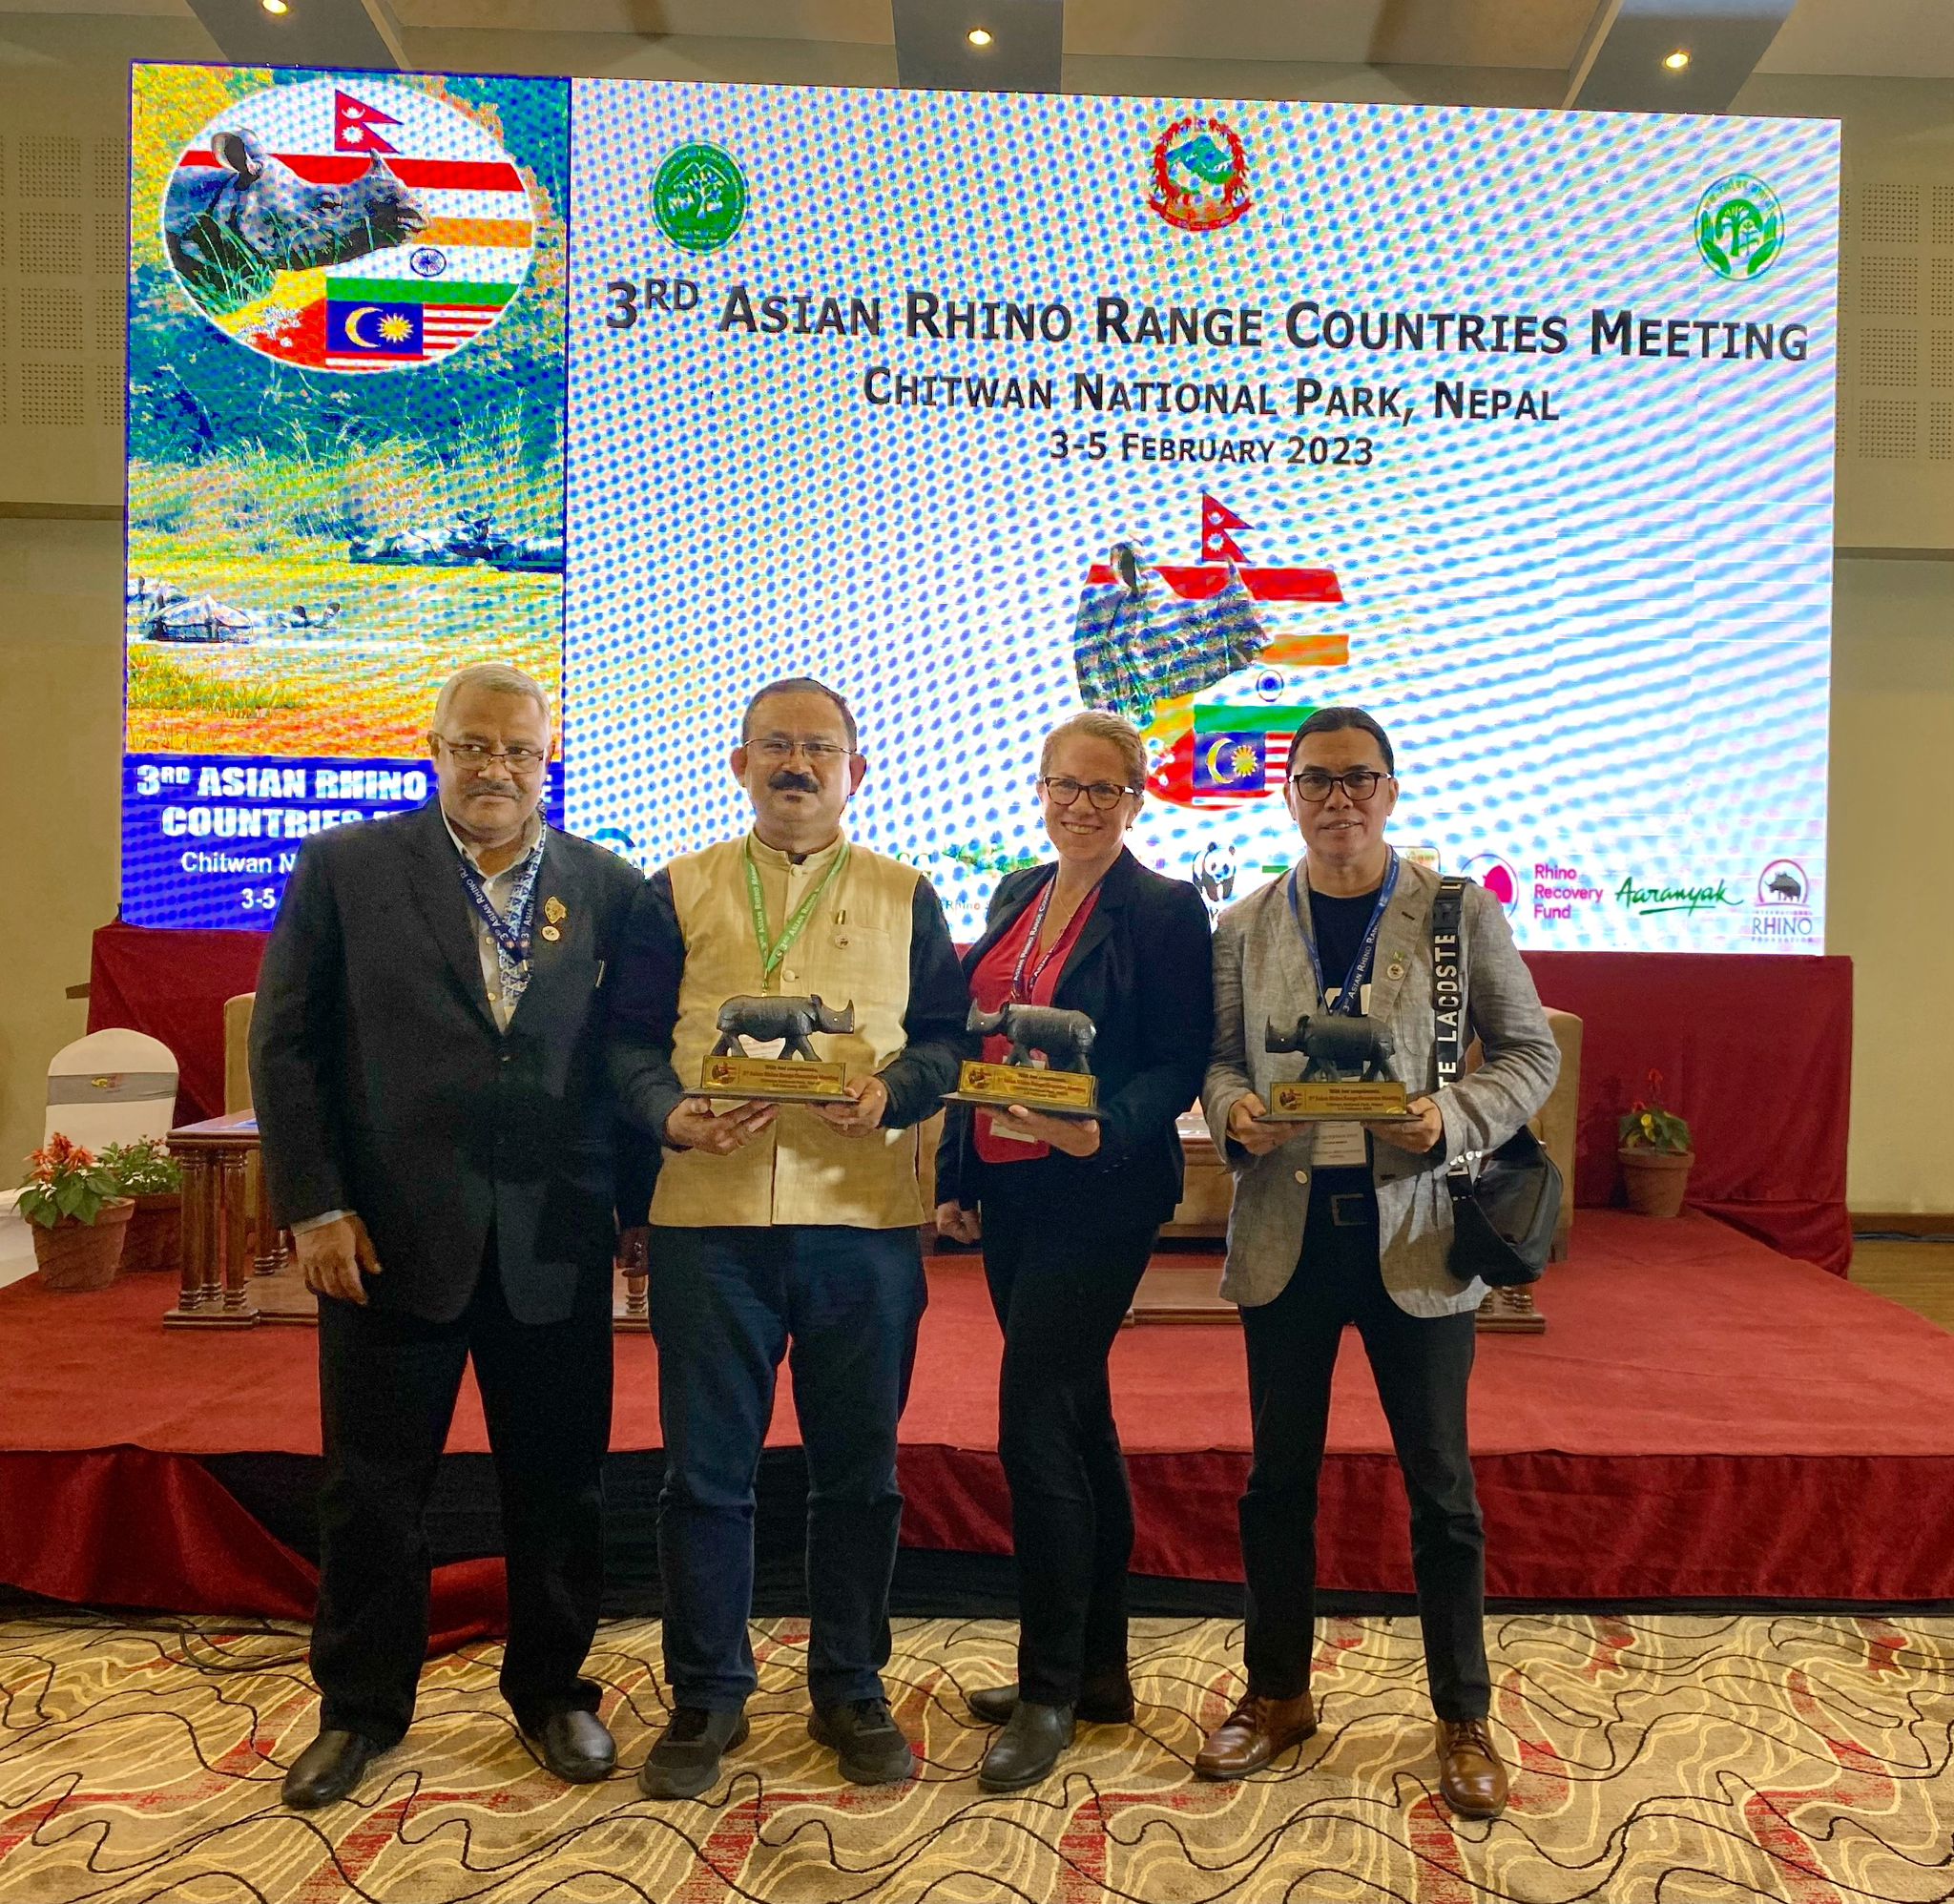 Third Asian Rhino Range Countries Meeting Concludes with Declaration Outlining Priorities for Rhino Conservation